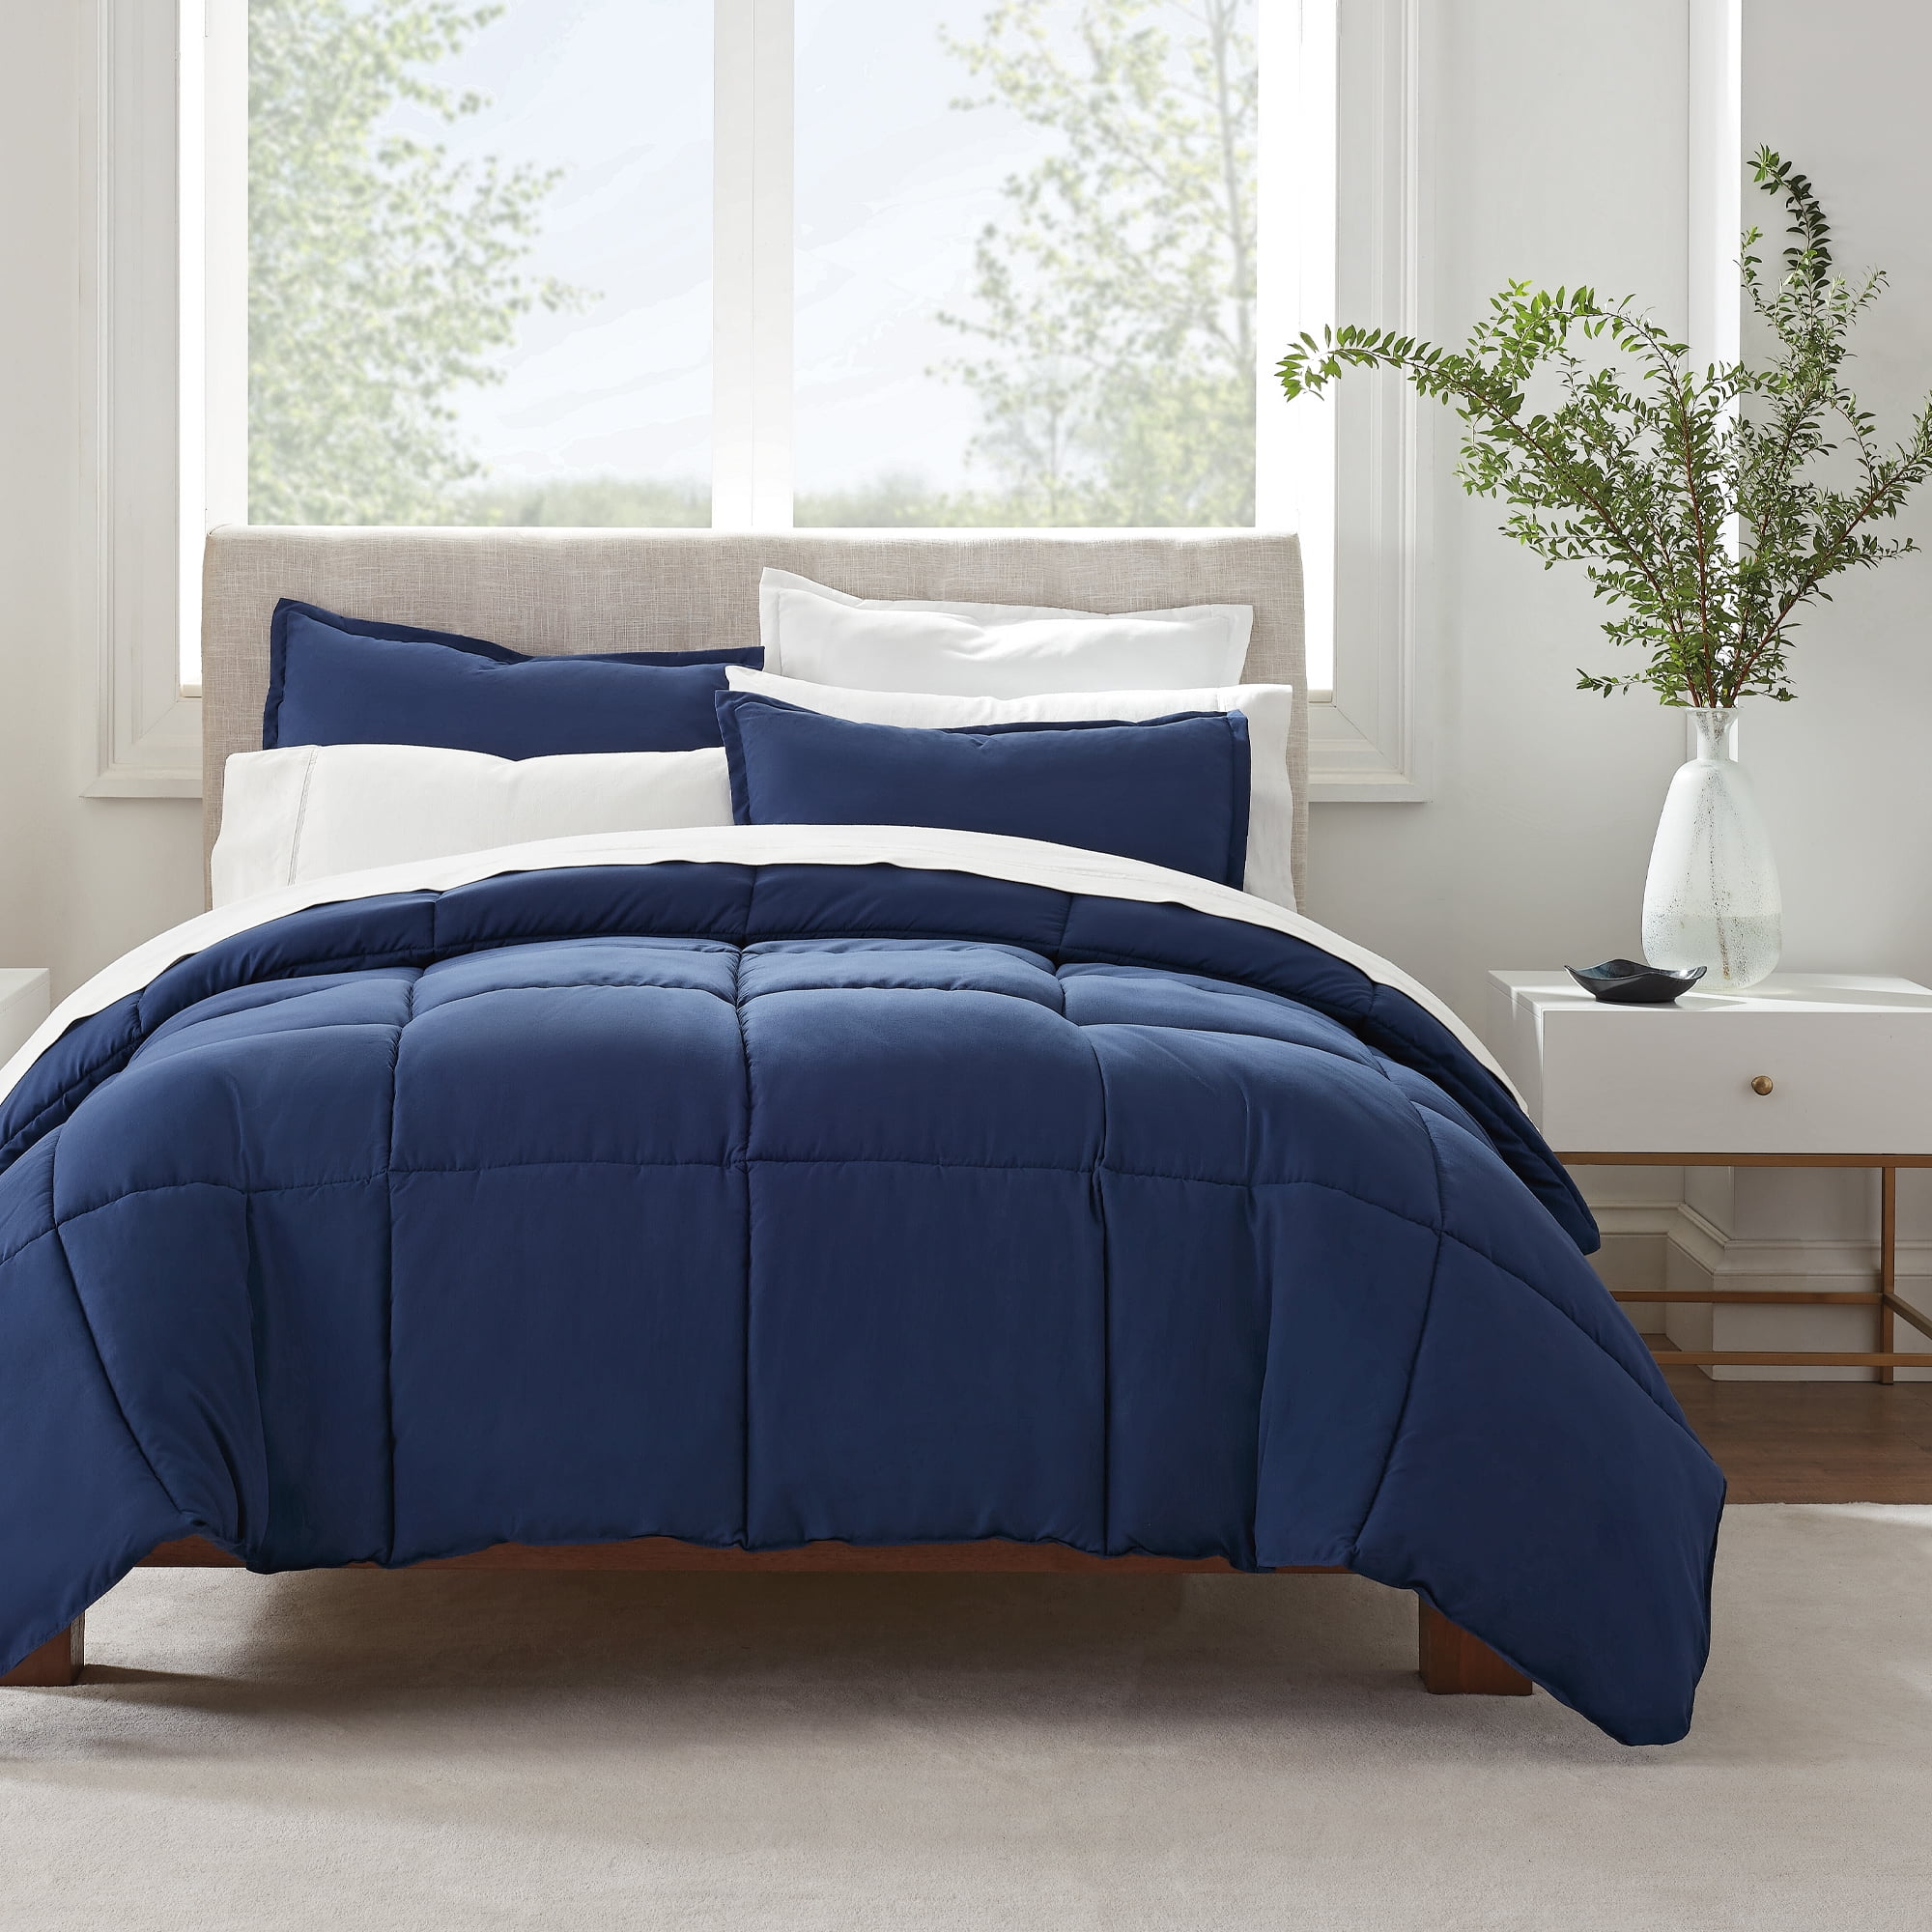 Serta Simply Clean Antimicrobial 3-Piece Navy Blue Solid Comforter Set ...